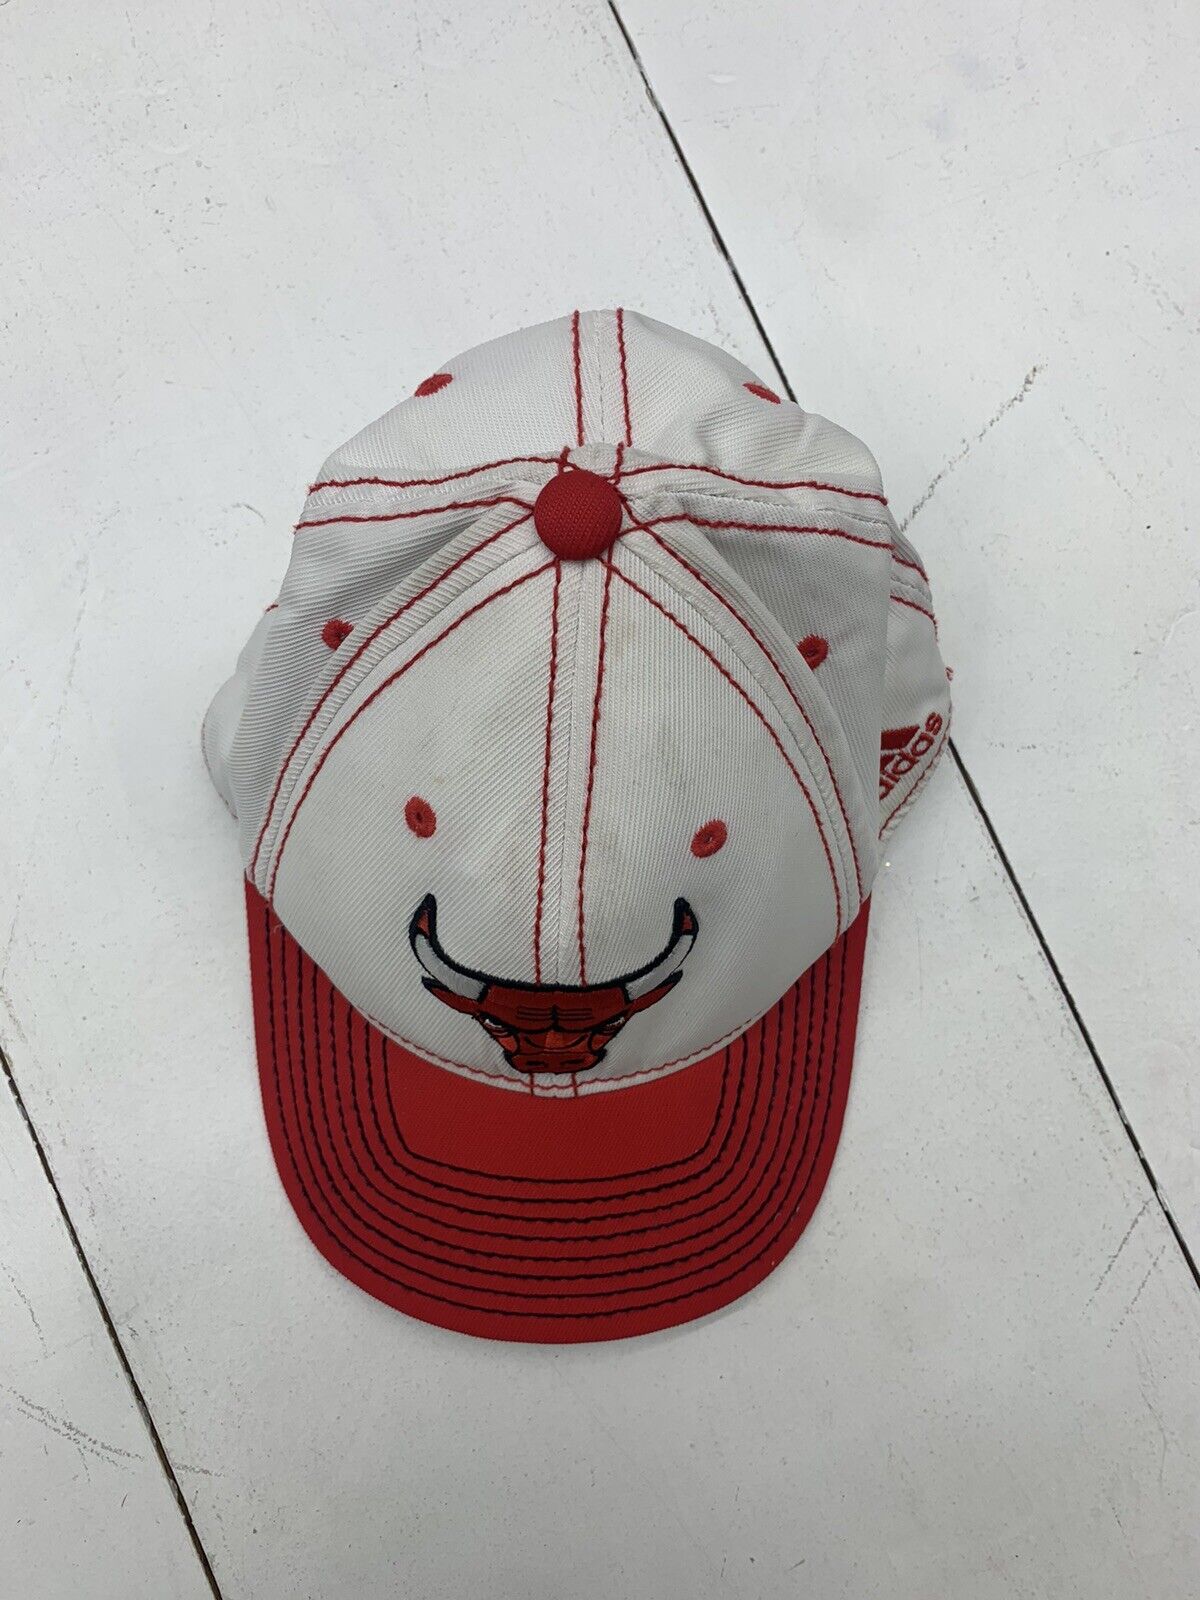 Adidas Mens White Red Chicago Bulls Fitted Cap Size Small - beyond exchange